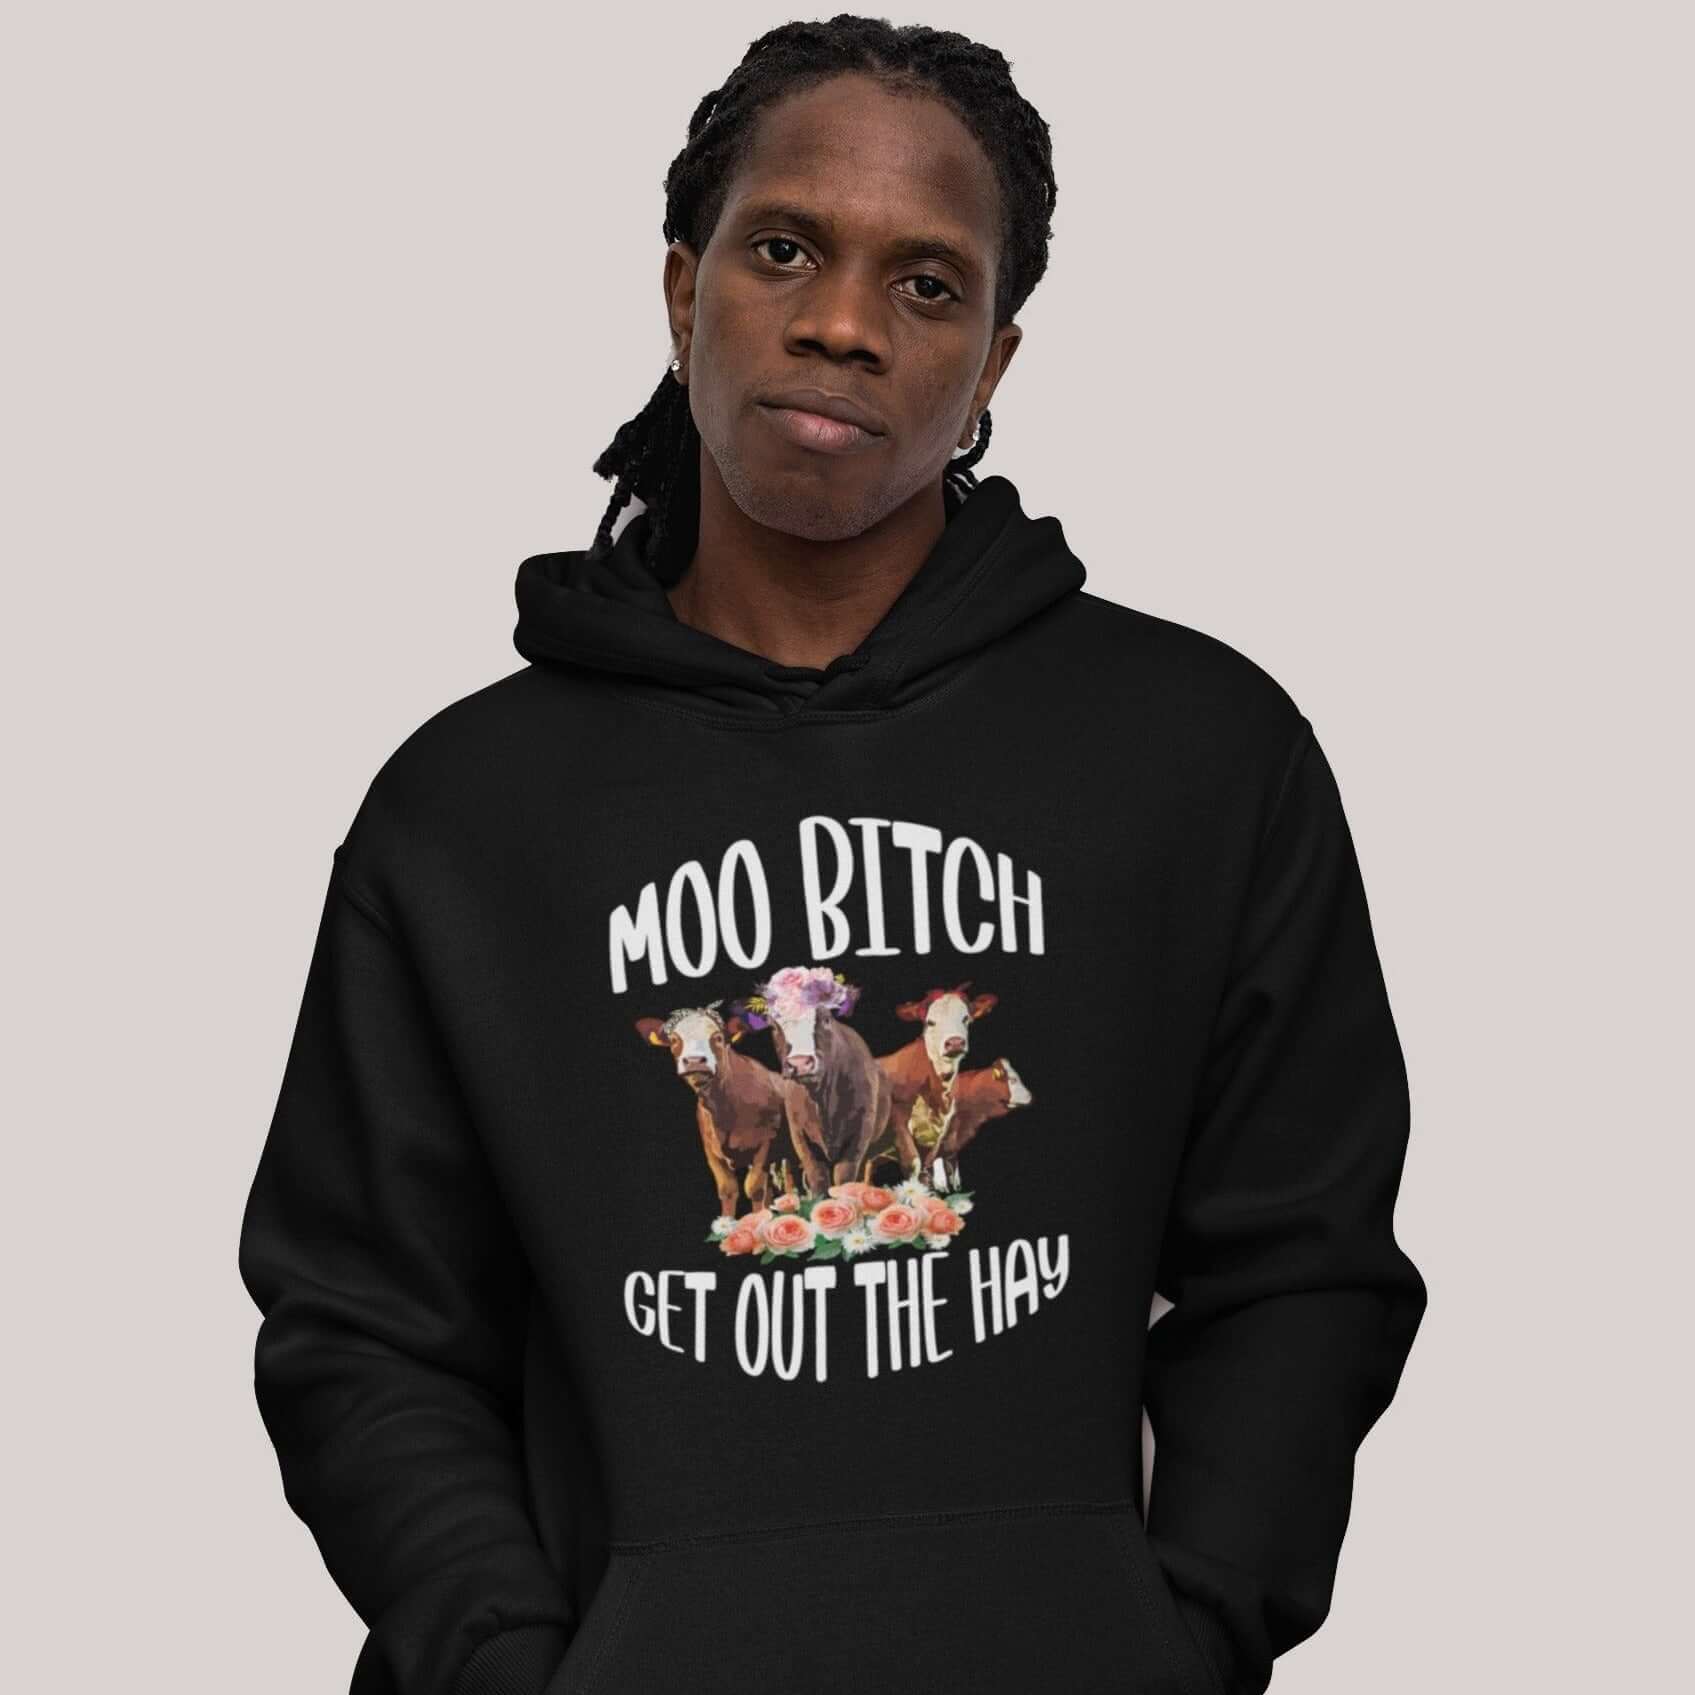 Man wearing black hoodie sweatshirt with an image of 3 cows and the words Moo bitch get out the hay printed on the front.